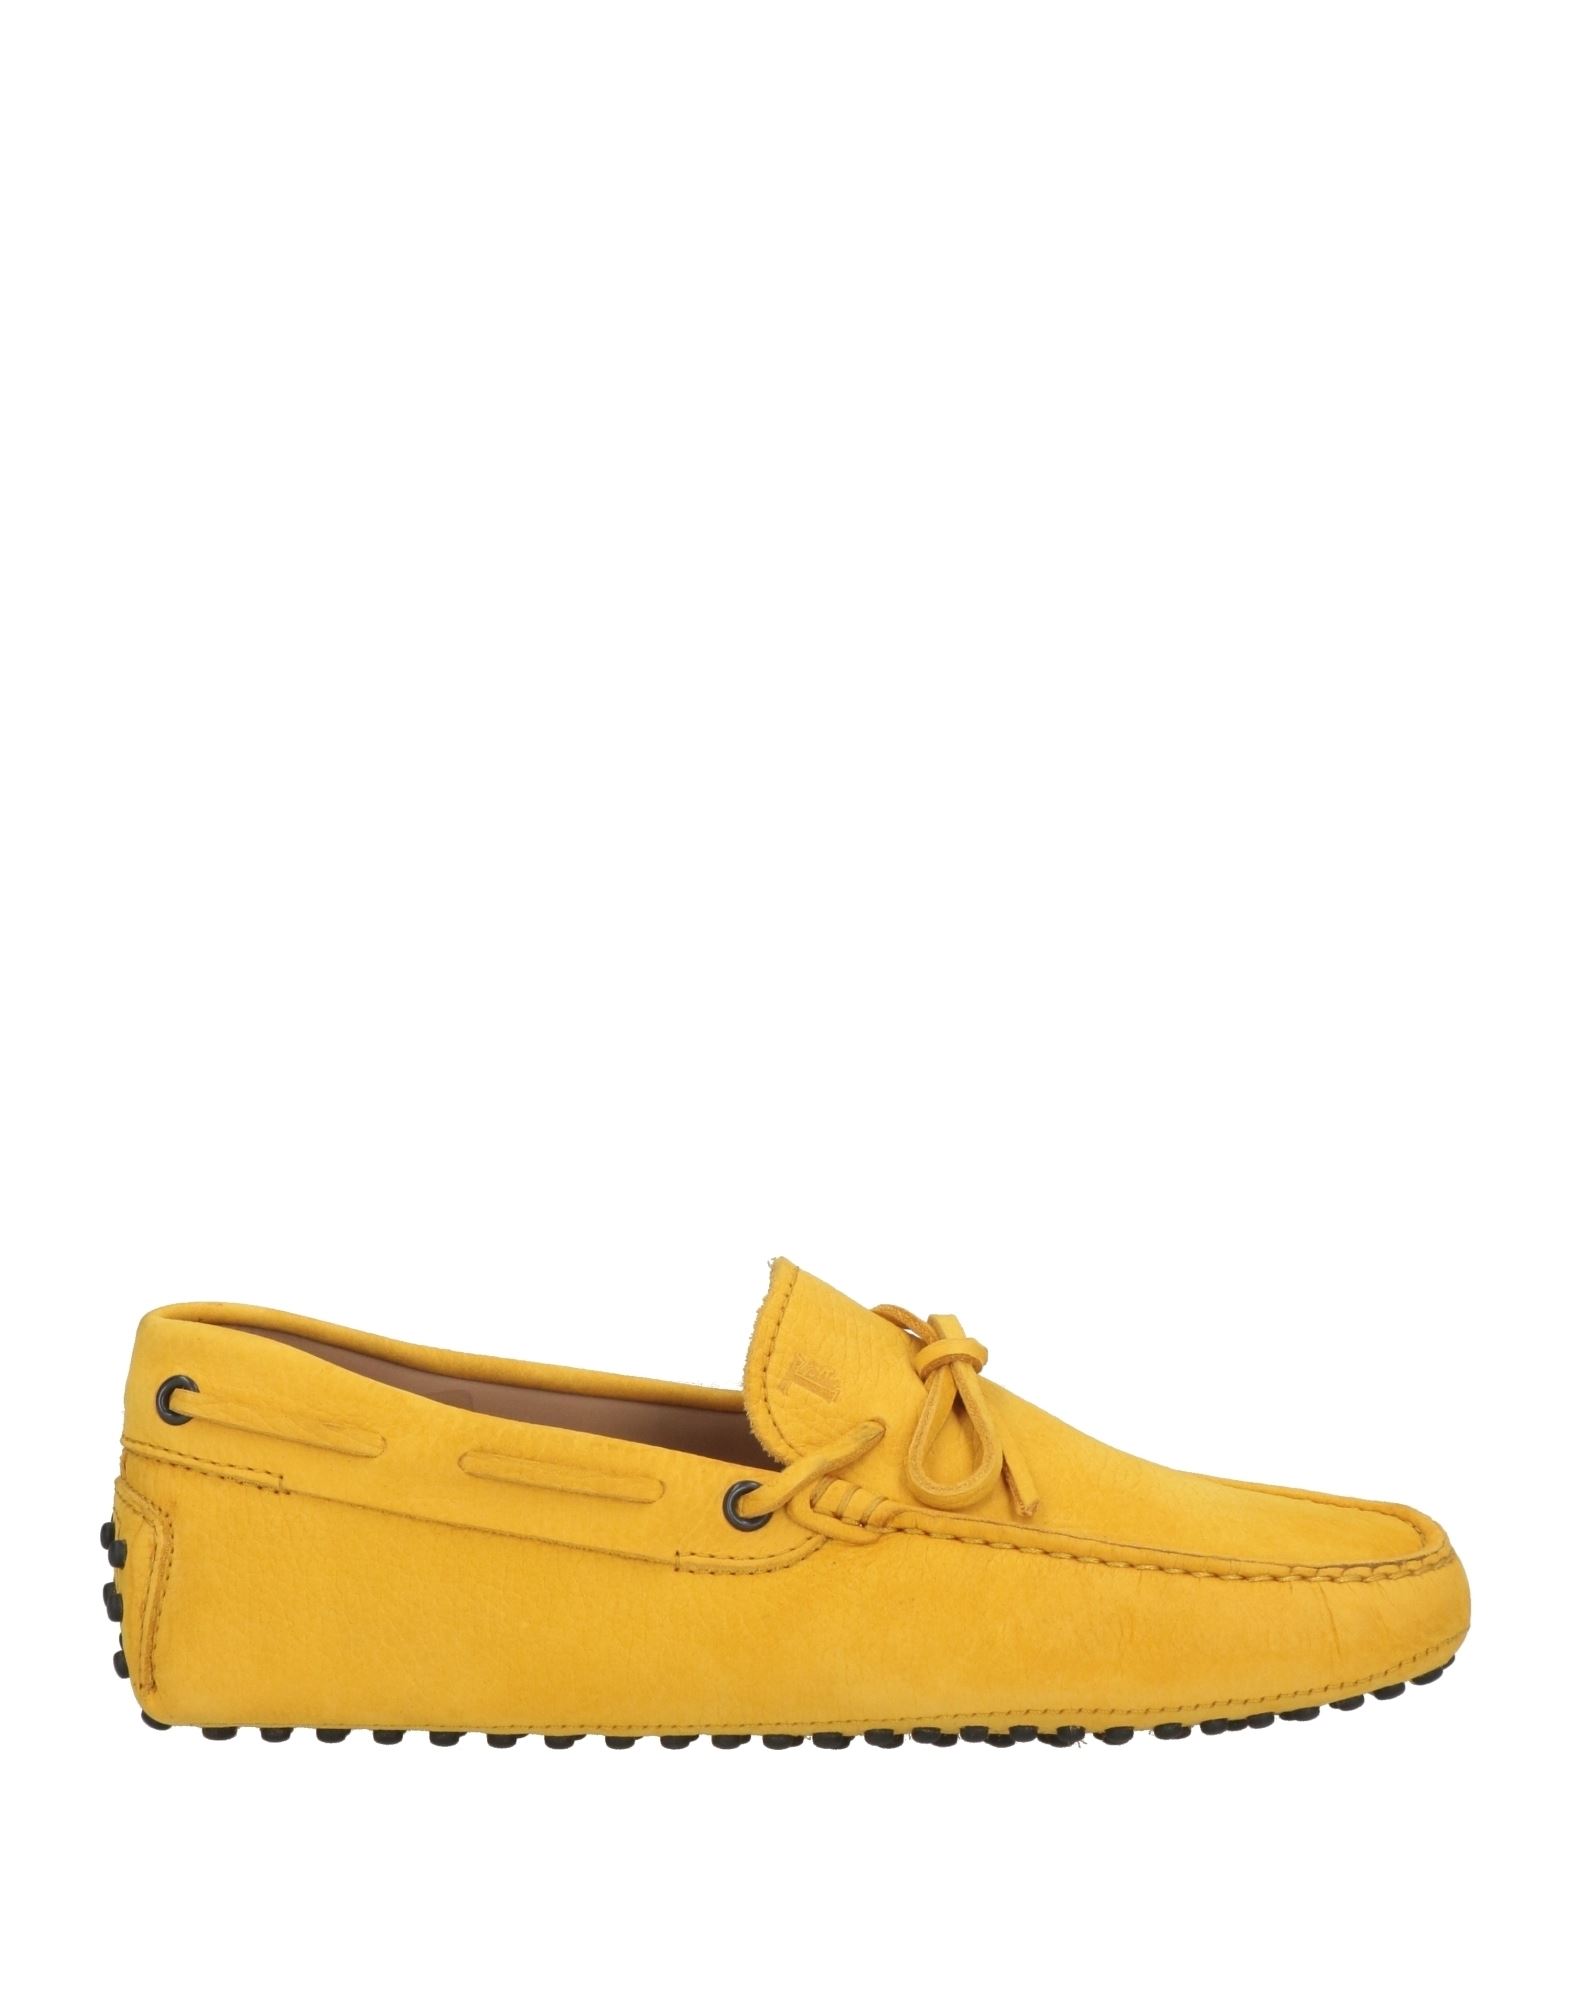 TOD'S TOD'S MAN LOAFERS YELLOW SIZE 7 LEATHER,11177122UJ 9